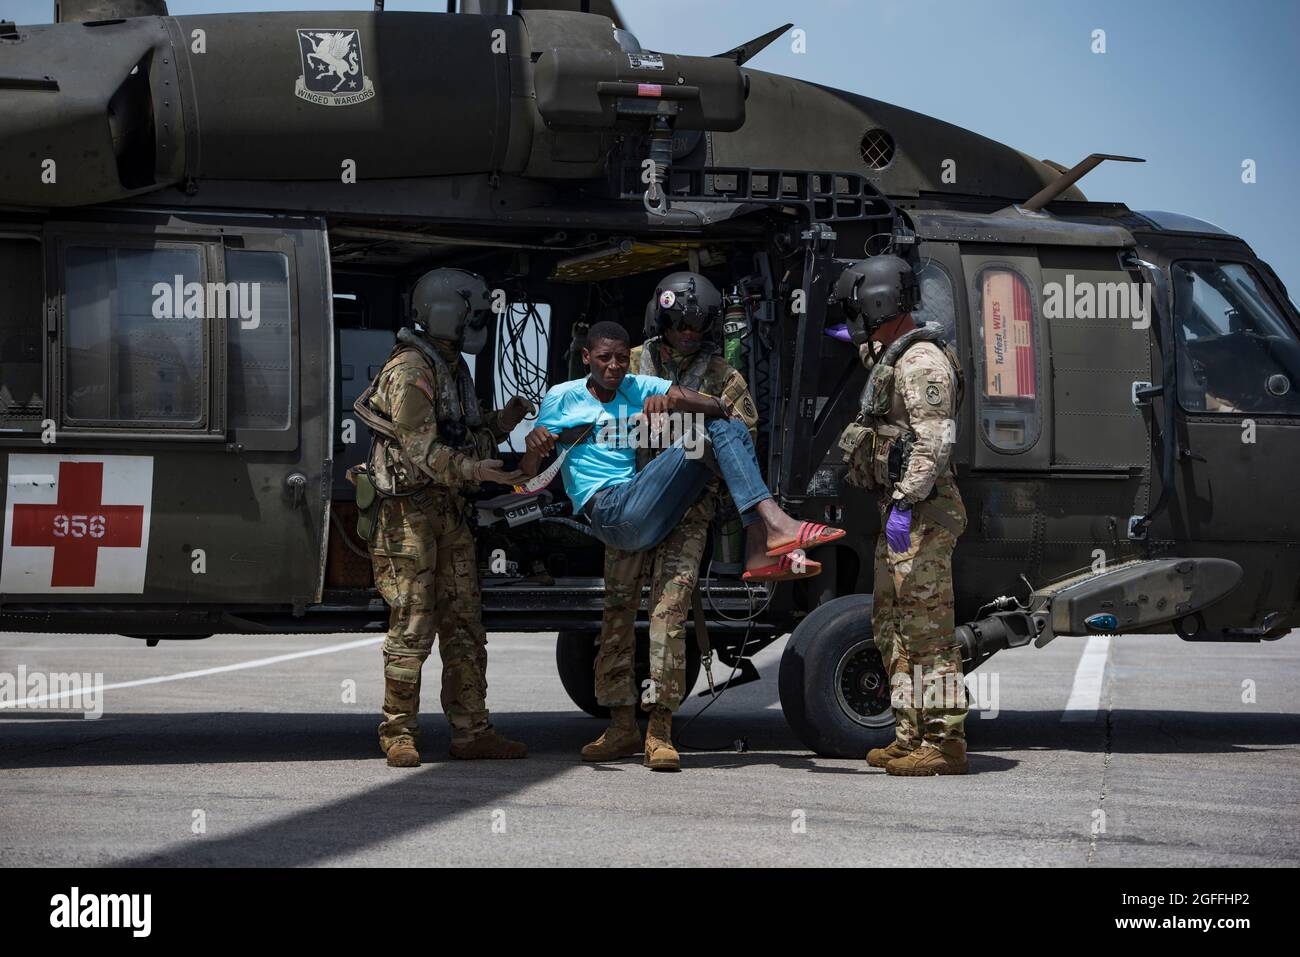 Port Au Prince, Haiti. 24th Aug, 2021. U.S. Army soldiers, with the 228th Aviation Regiment, unload a patient from a UH-60 Black Hawk helicopter during a medical evacuation mission August 24, 2021 in Port-au-Prince, Haiti. The military is assisting in the aftermath of the recent earthquake. Credit: Planetpix/Alamy Live News Stock Photo